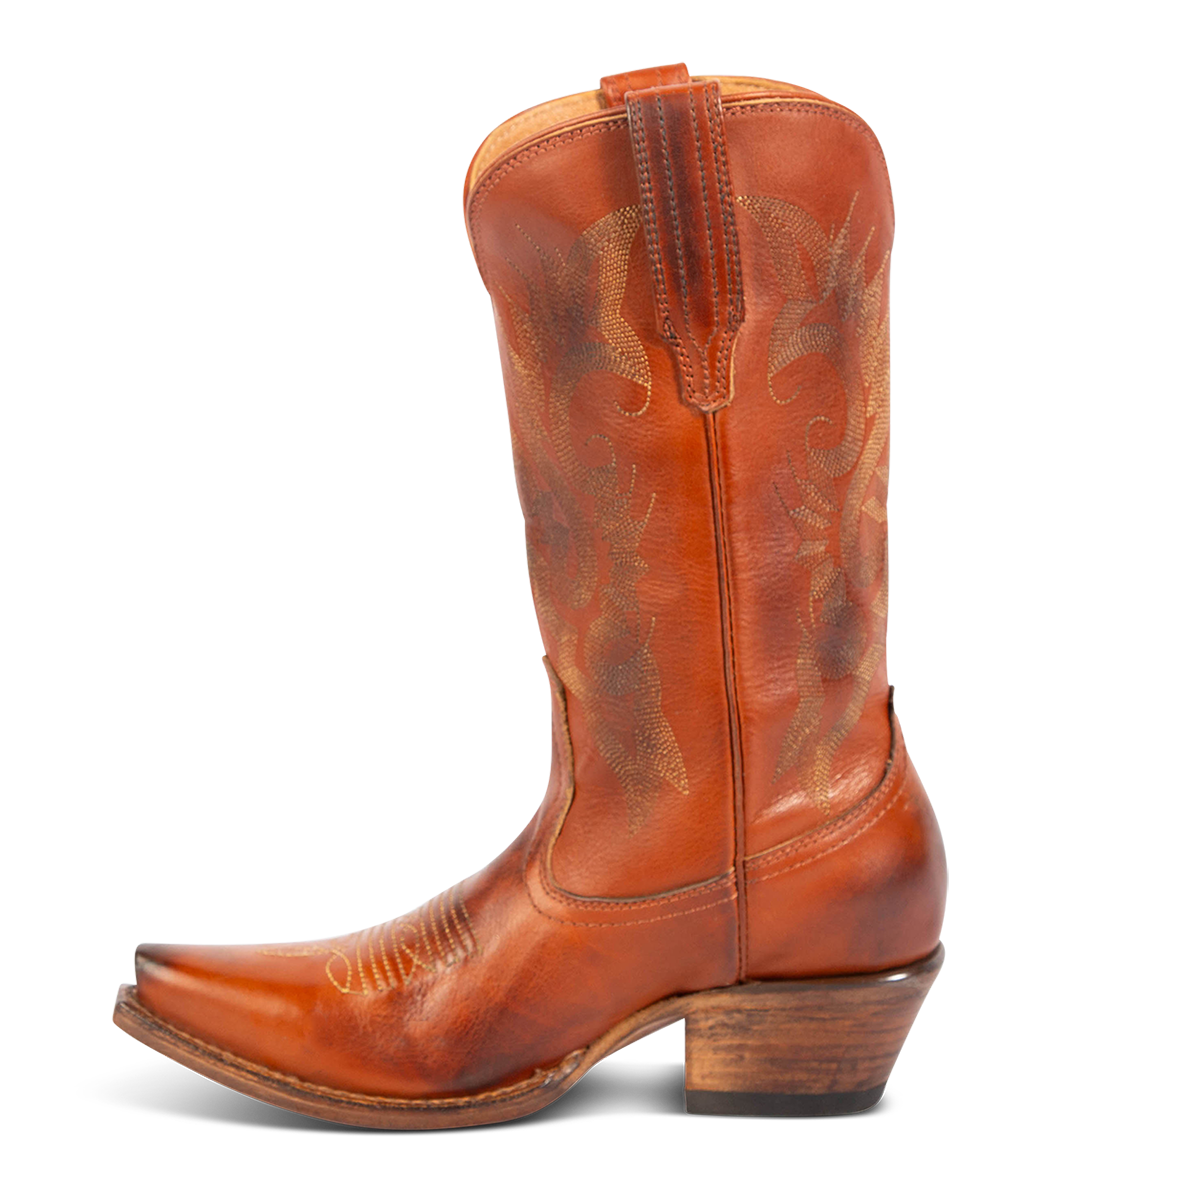 Side view showing FREEBIRD women's Woody whiskey leather boot with stitch detailing and snip toe construction